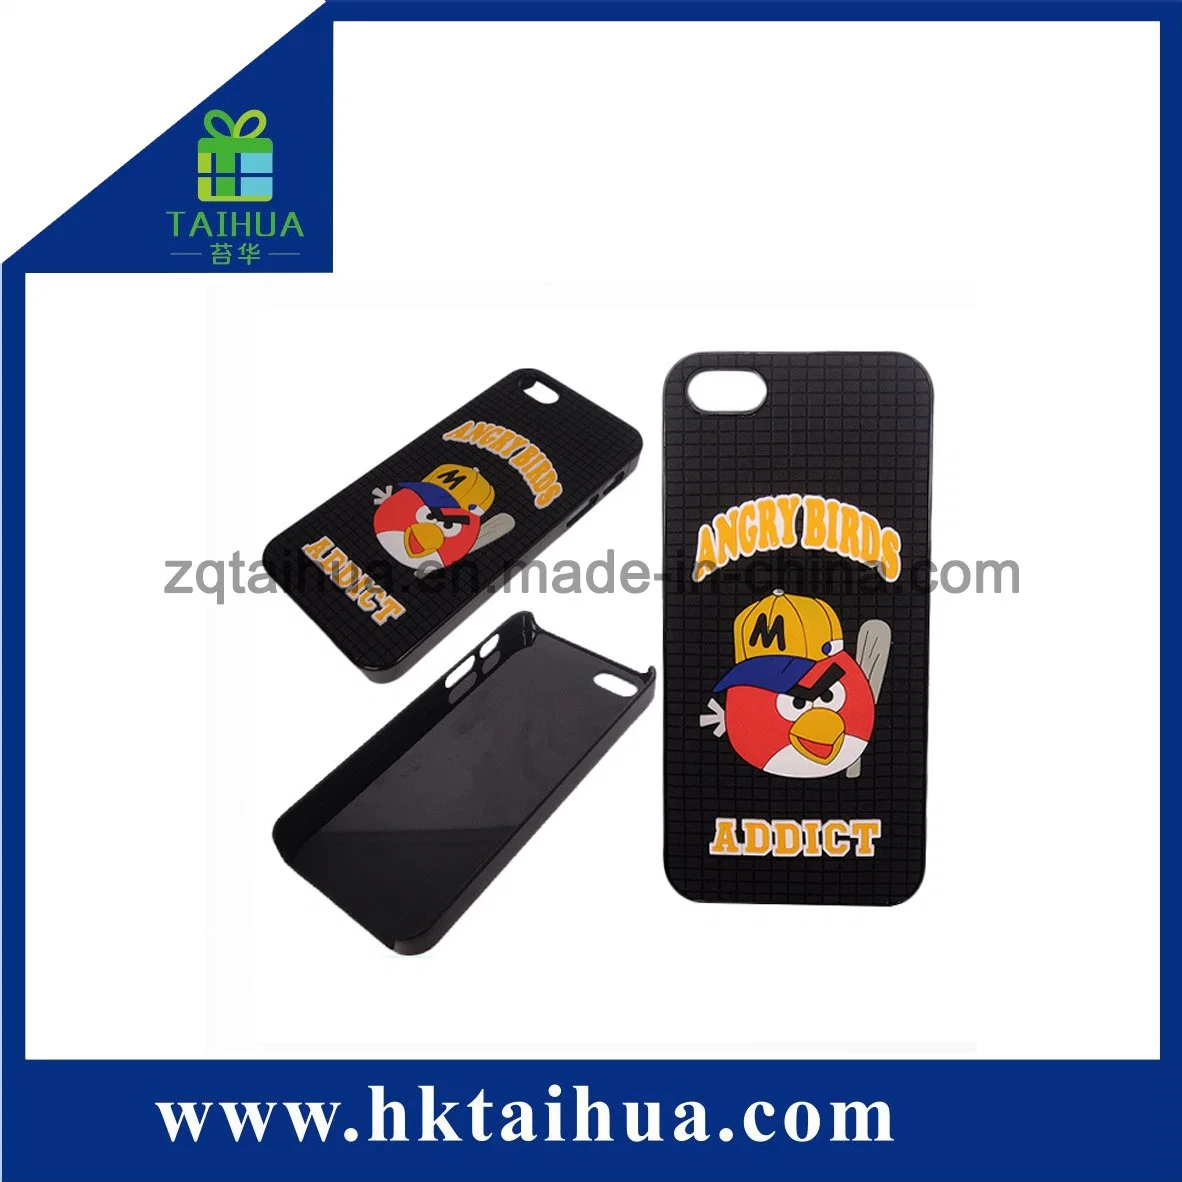 Phone Cover I5 Phone Case, Phone Cover with PC-004